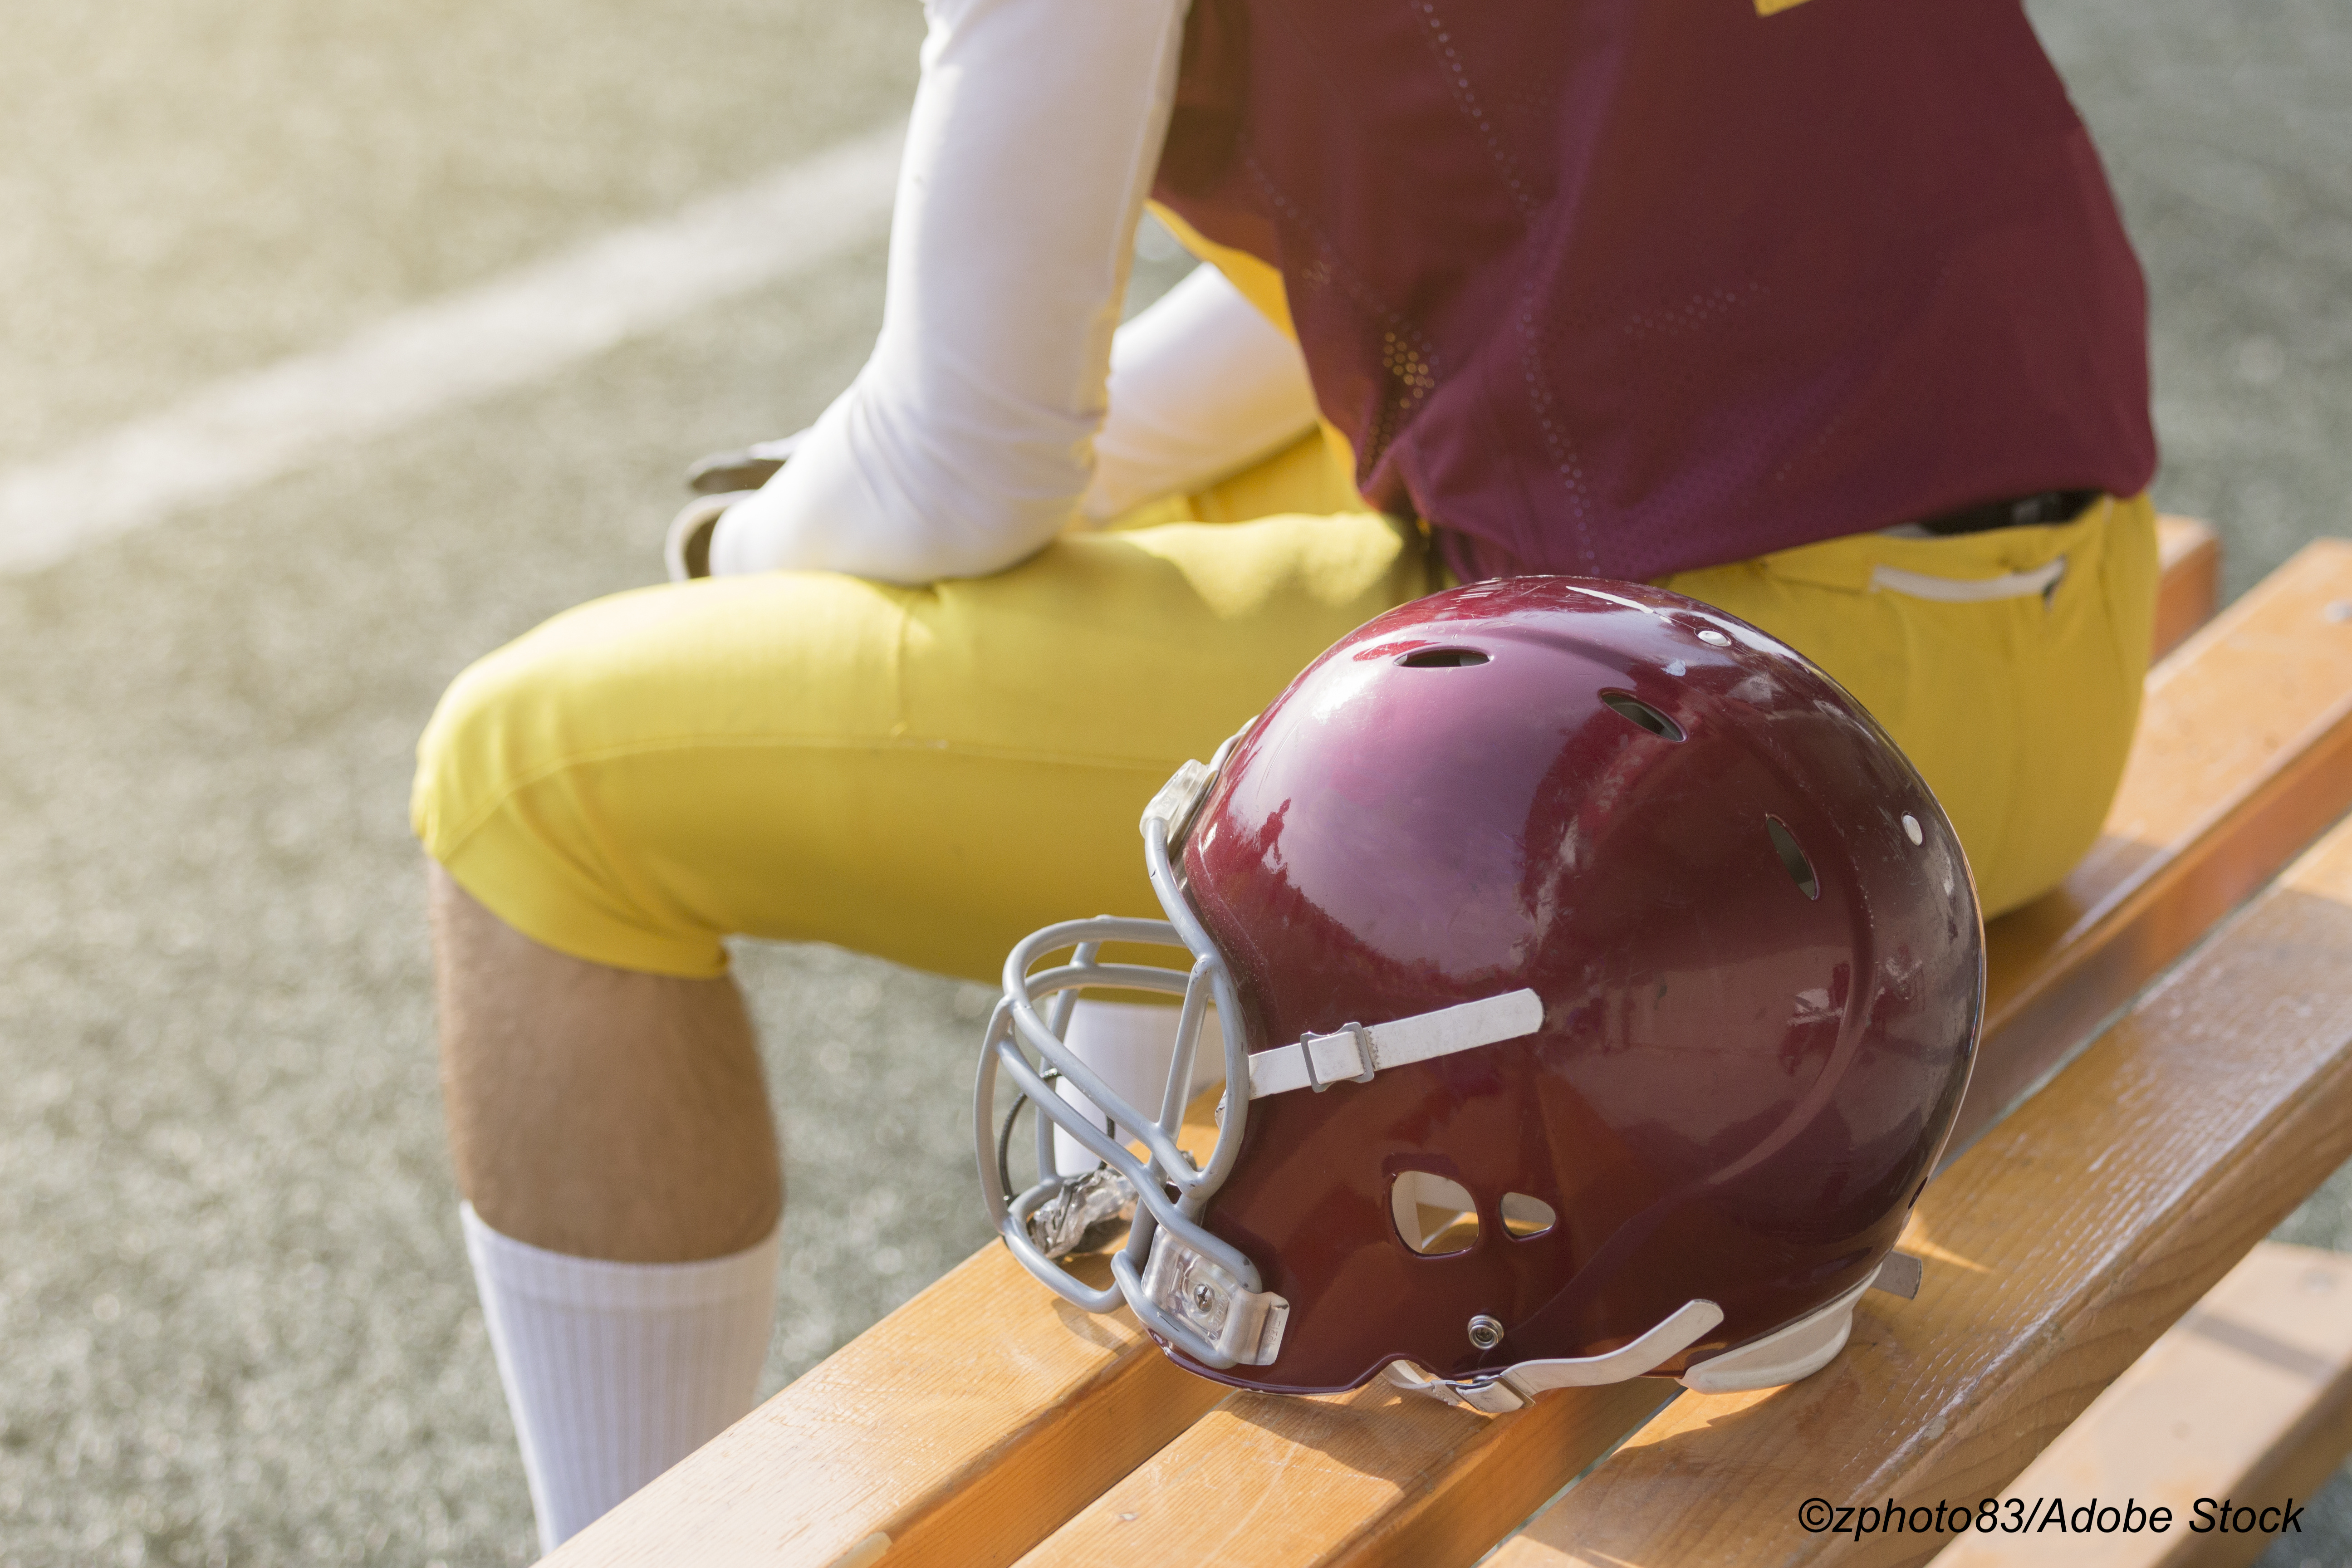 Brain Changes Seen in College Athletes with History of Concussion